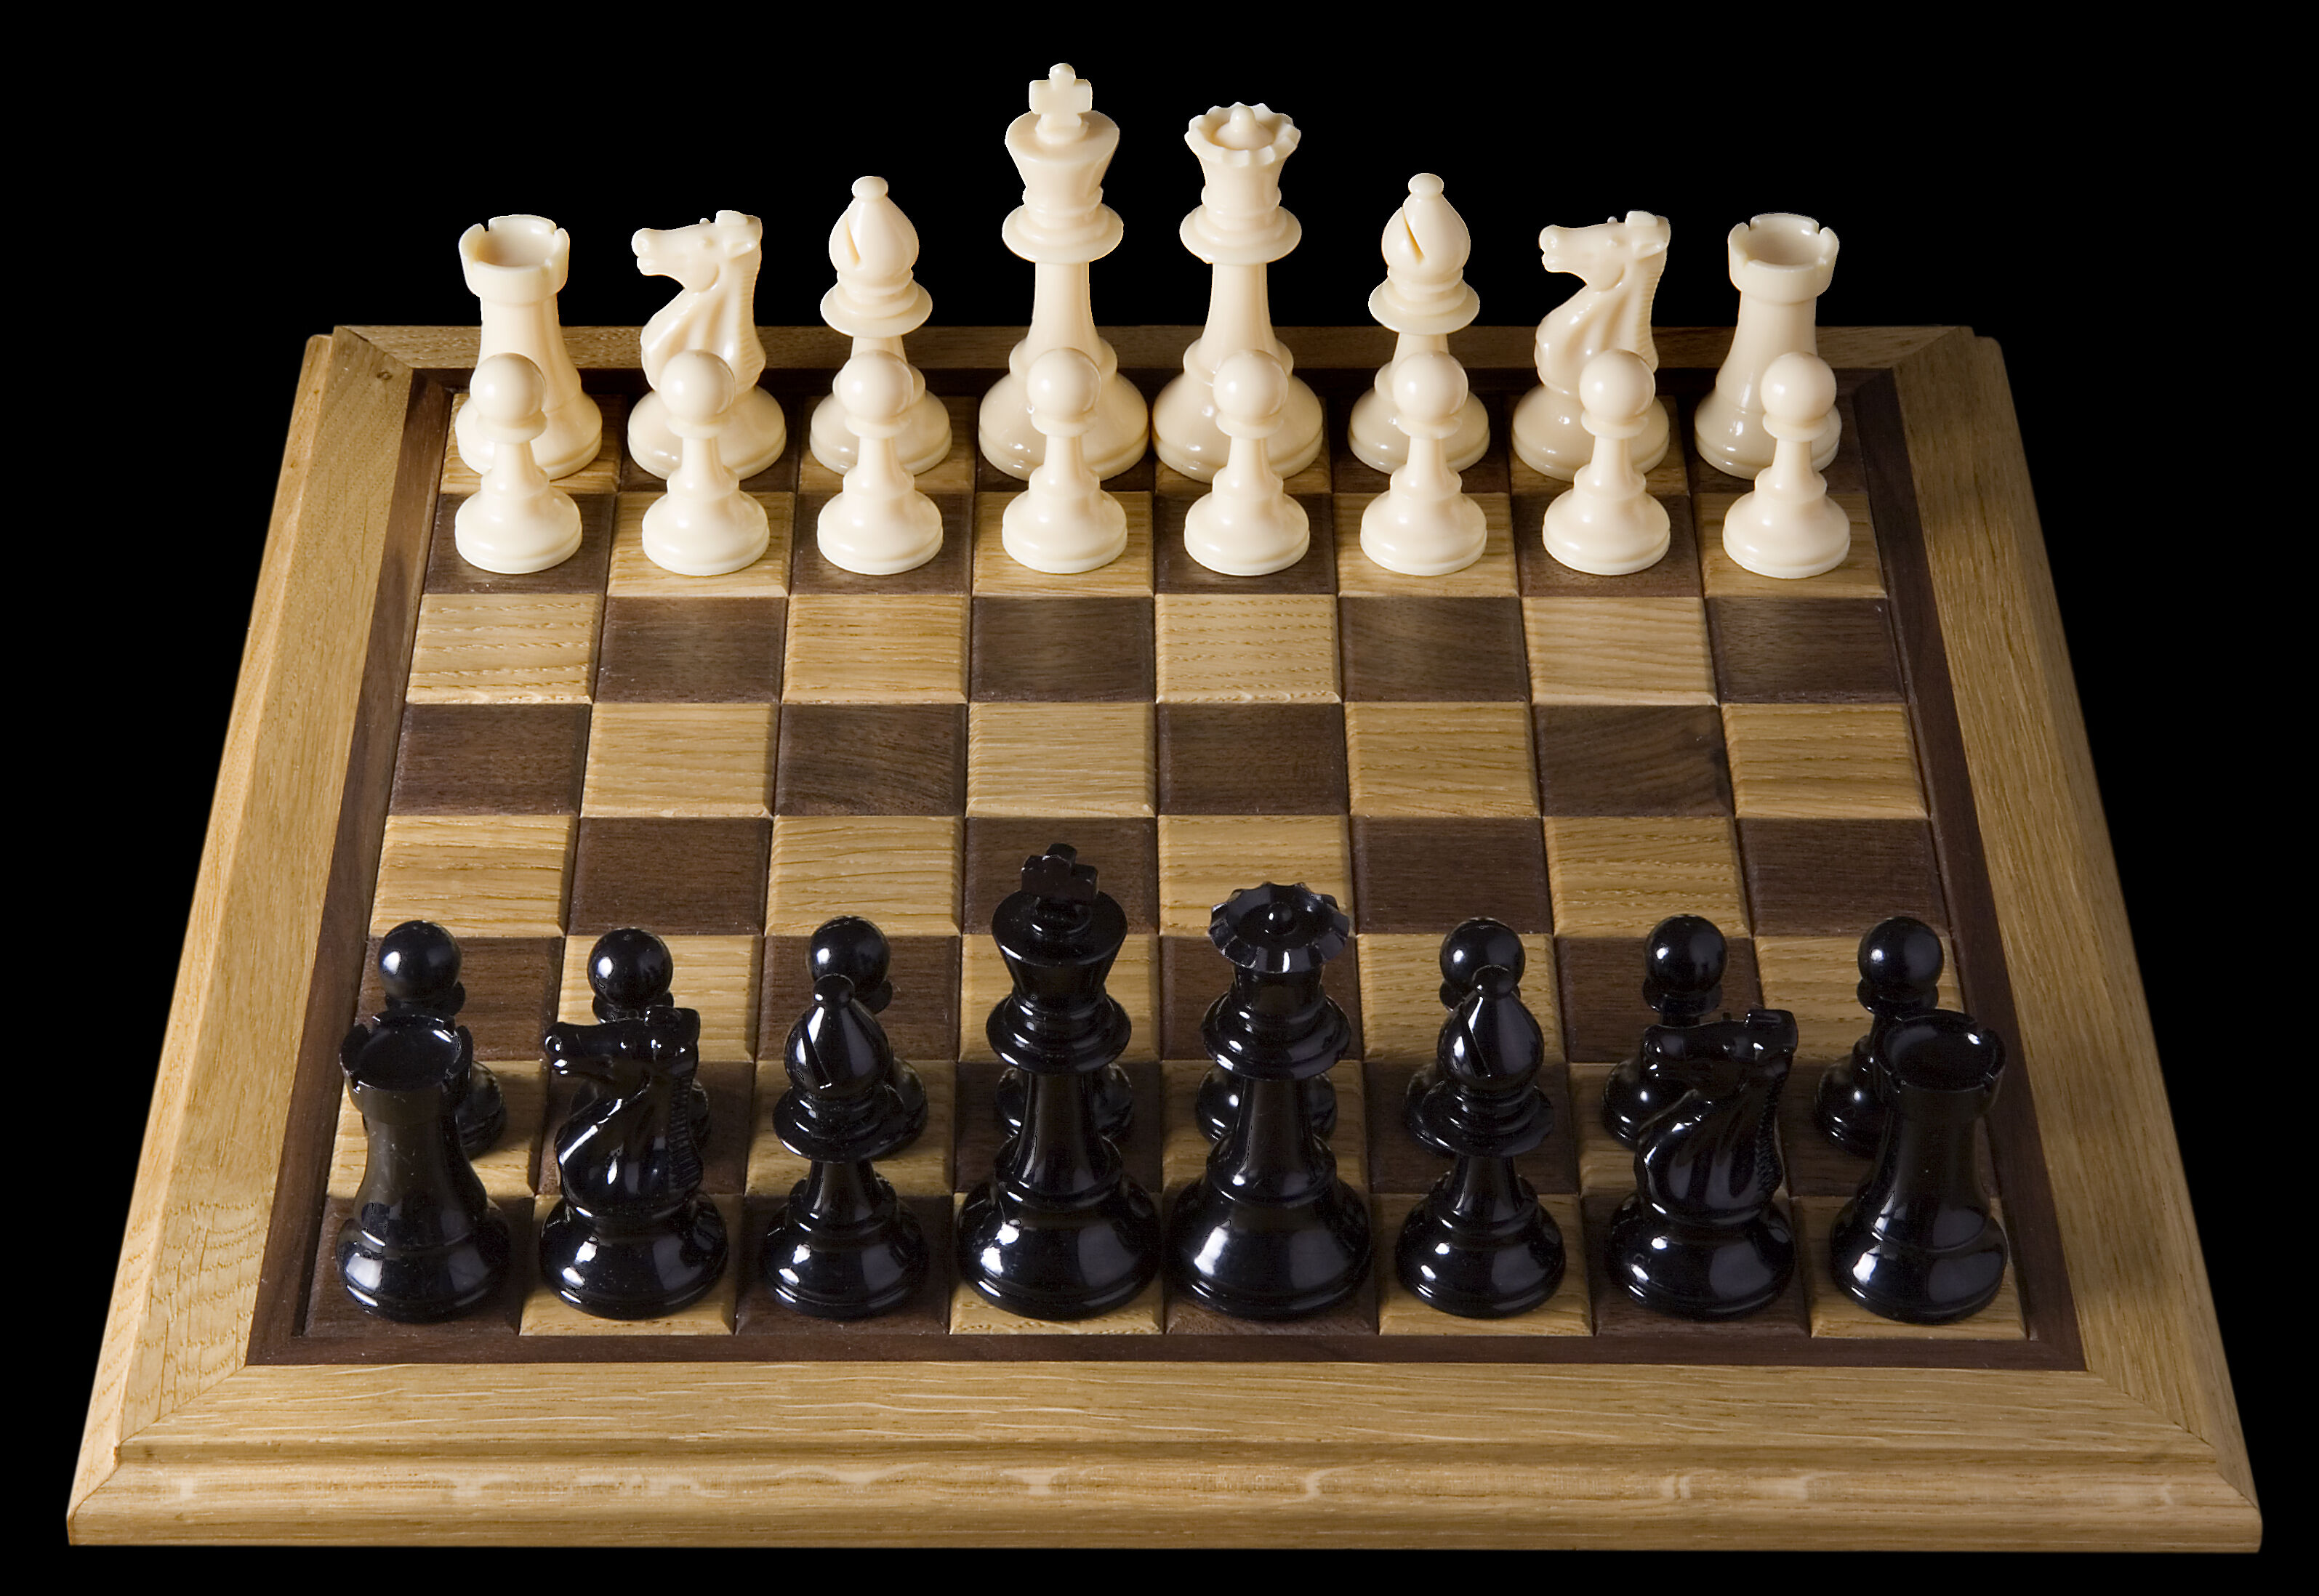 Wooden chess board with starting position